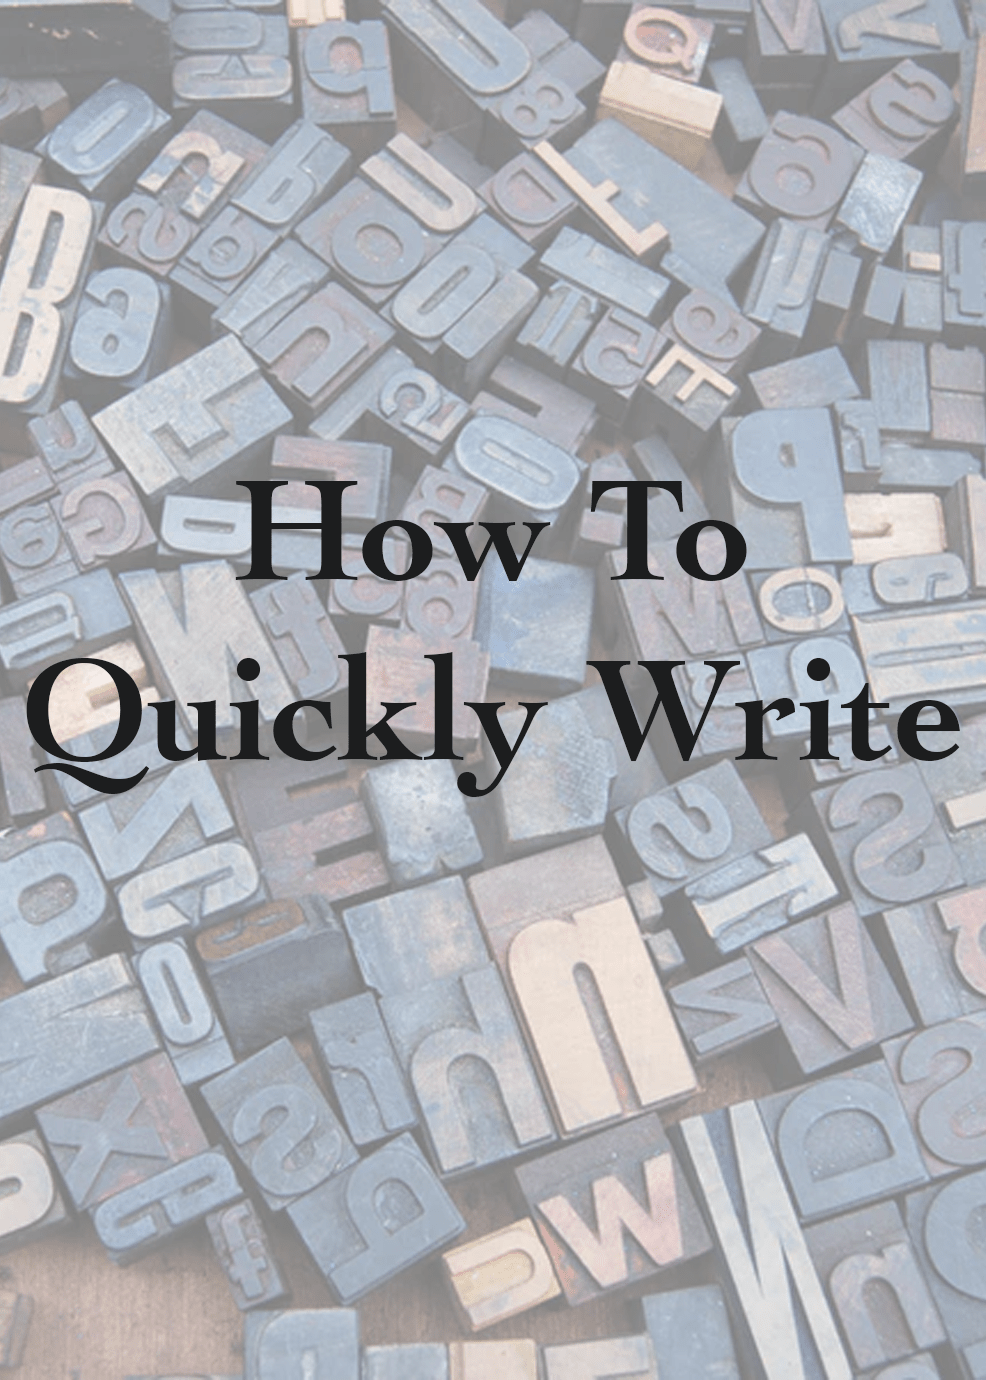 How To Quickly Write